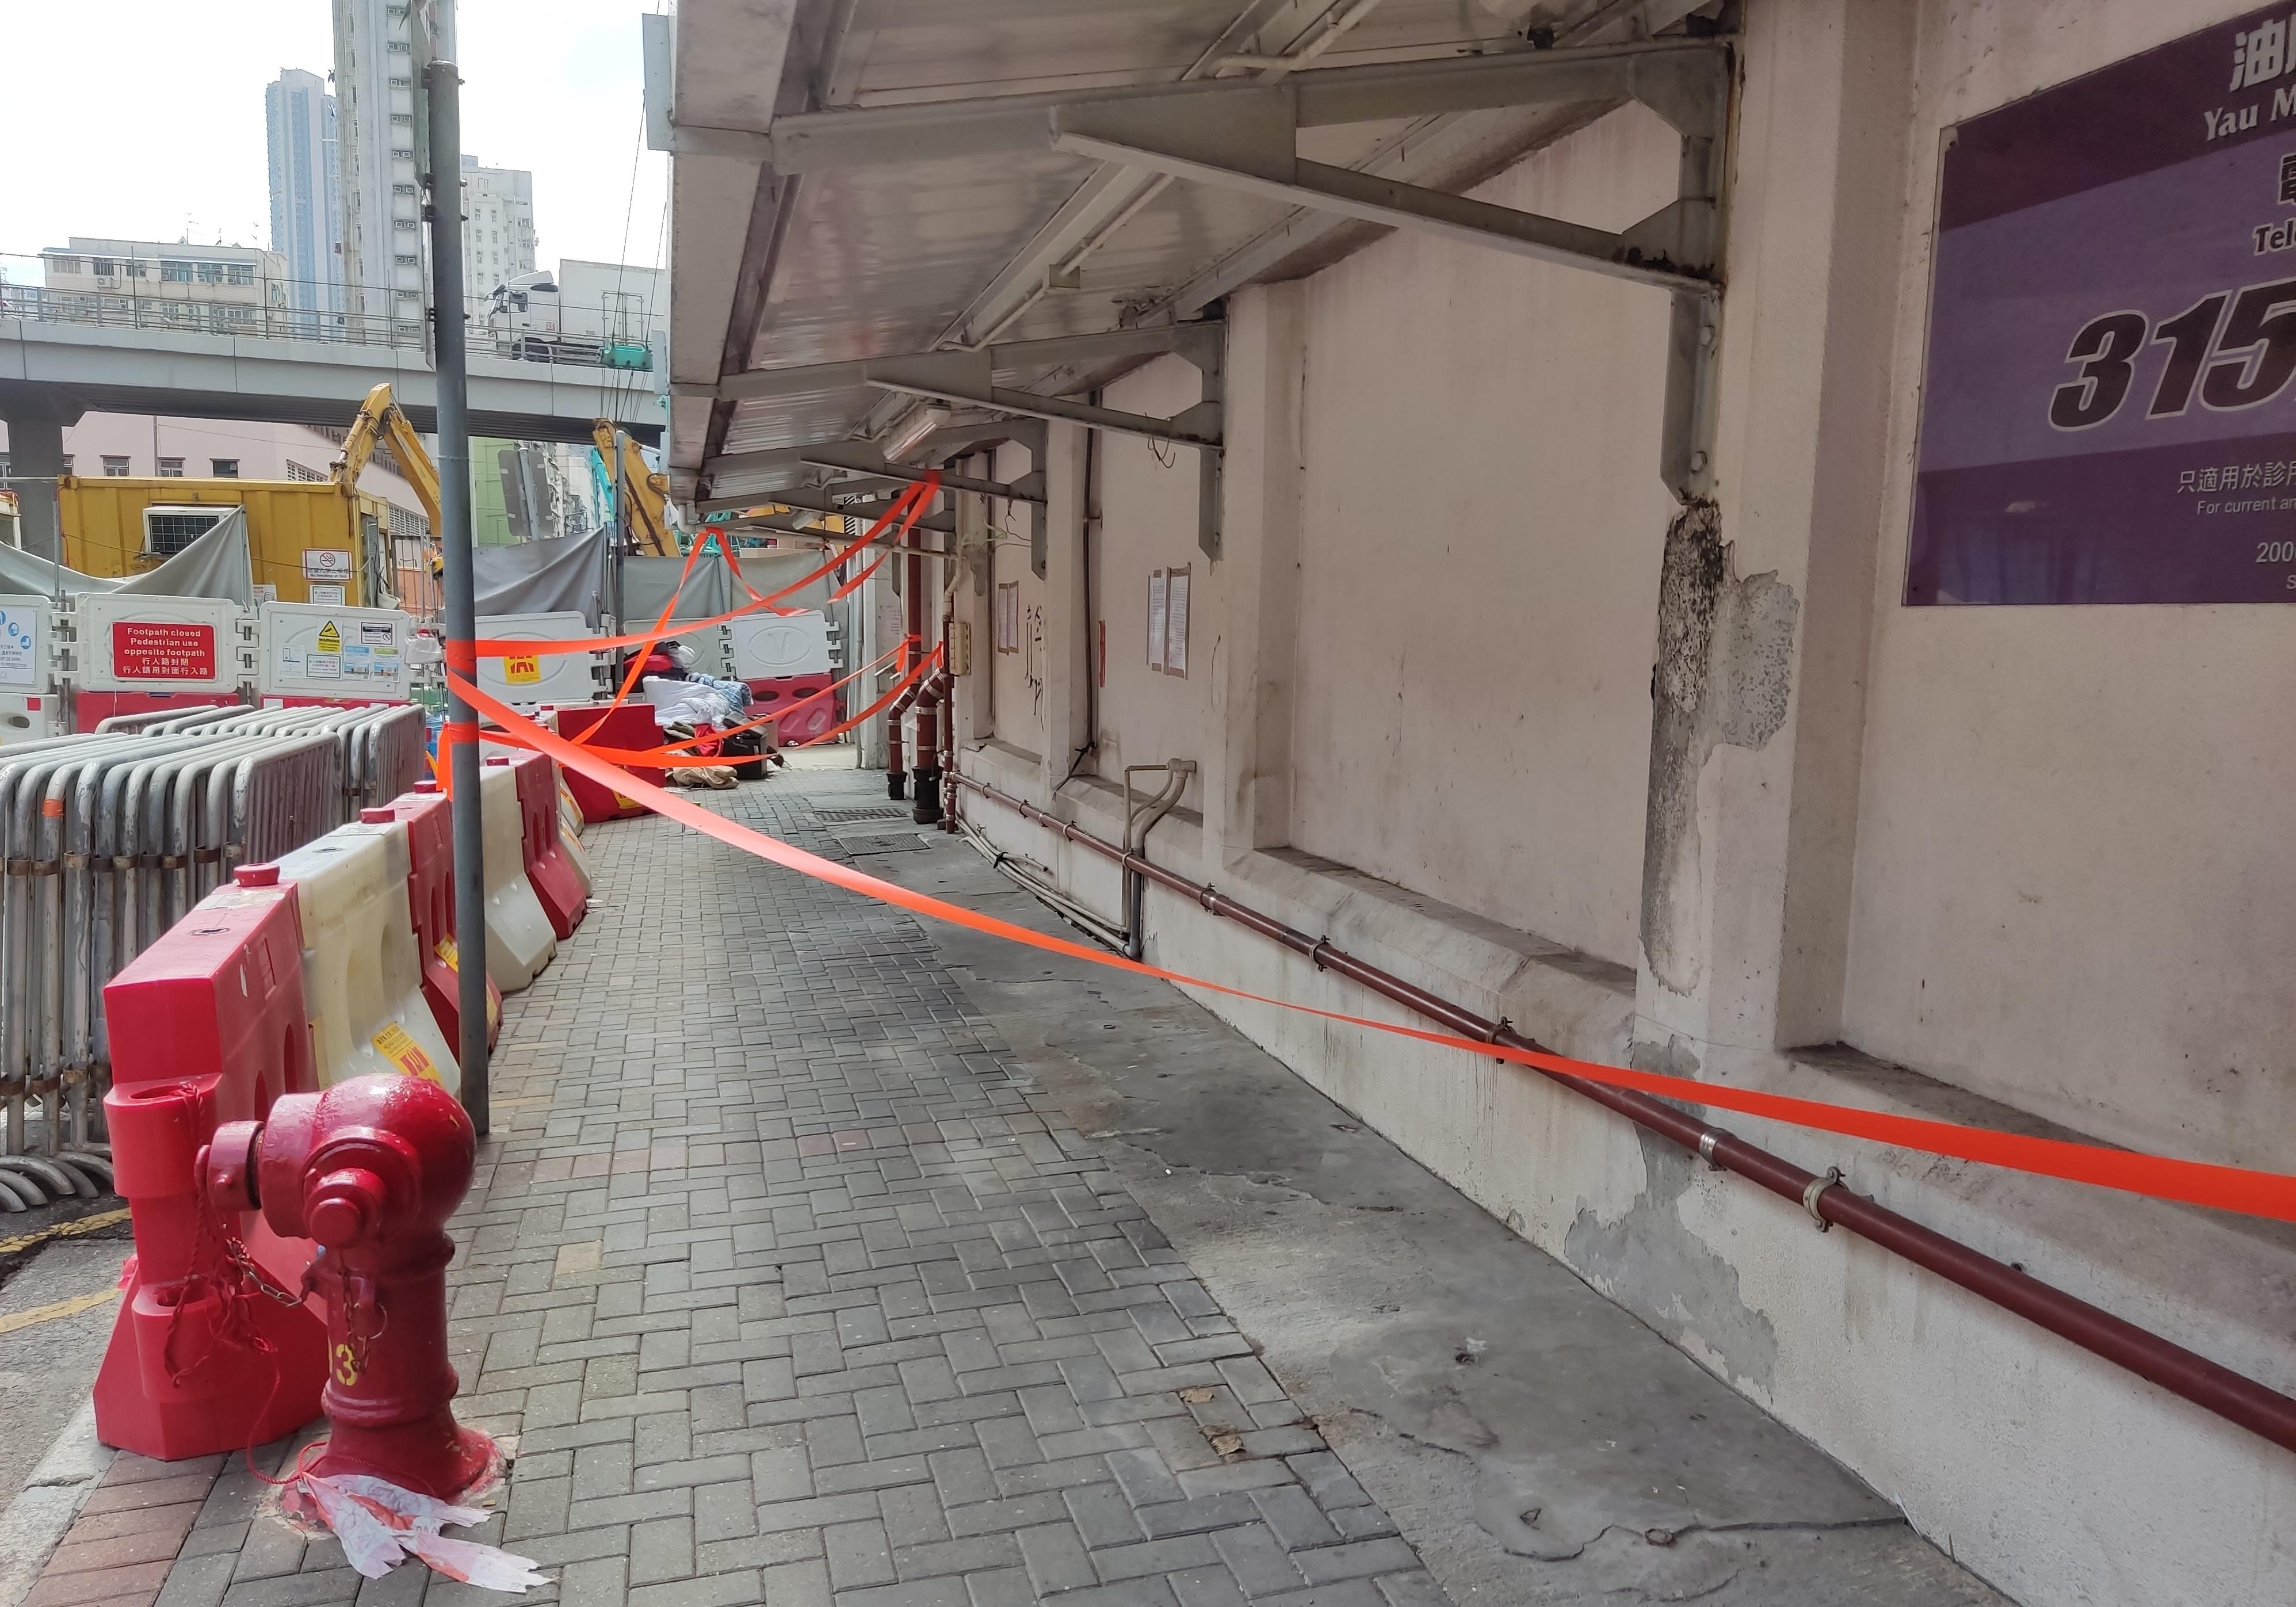 The Yau Tsim Mong District Office, together with relevant Government departments, today (February 28) conducted a joint operation to clear the miscellaneous articles outside the Yau Ma Tei Jockey Club General Out-patient Clinic.  Photo shows the front entrance of the Clinic after the joint operation.

